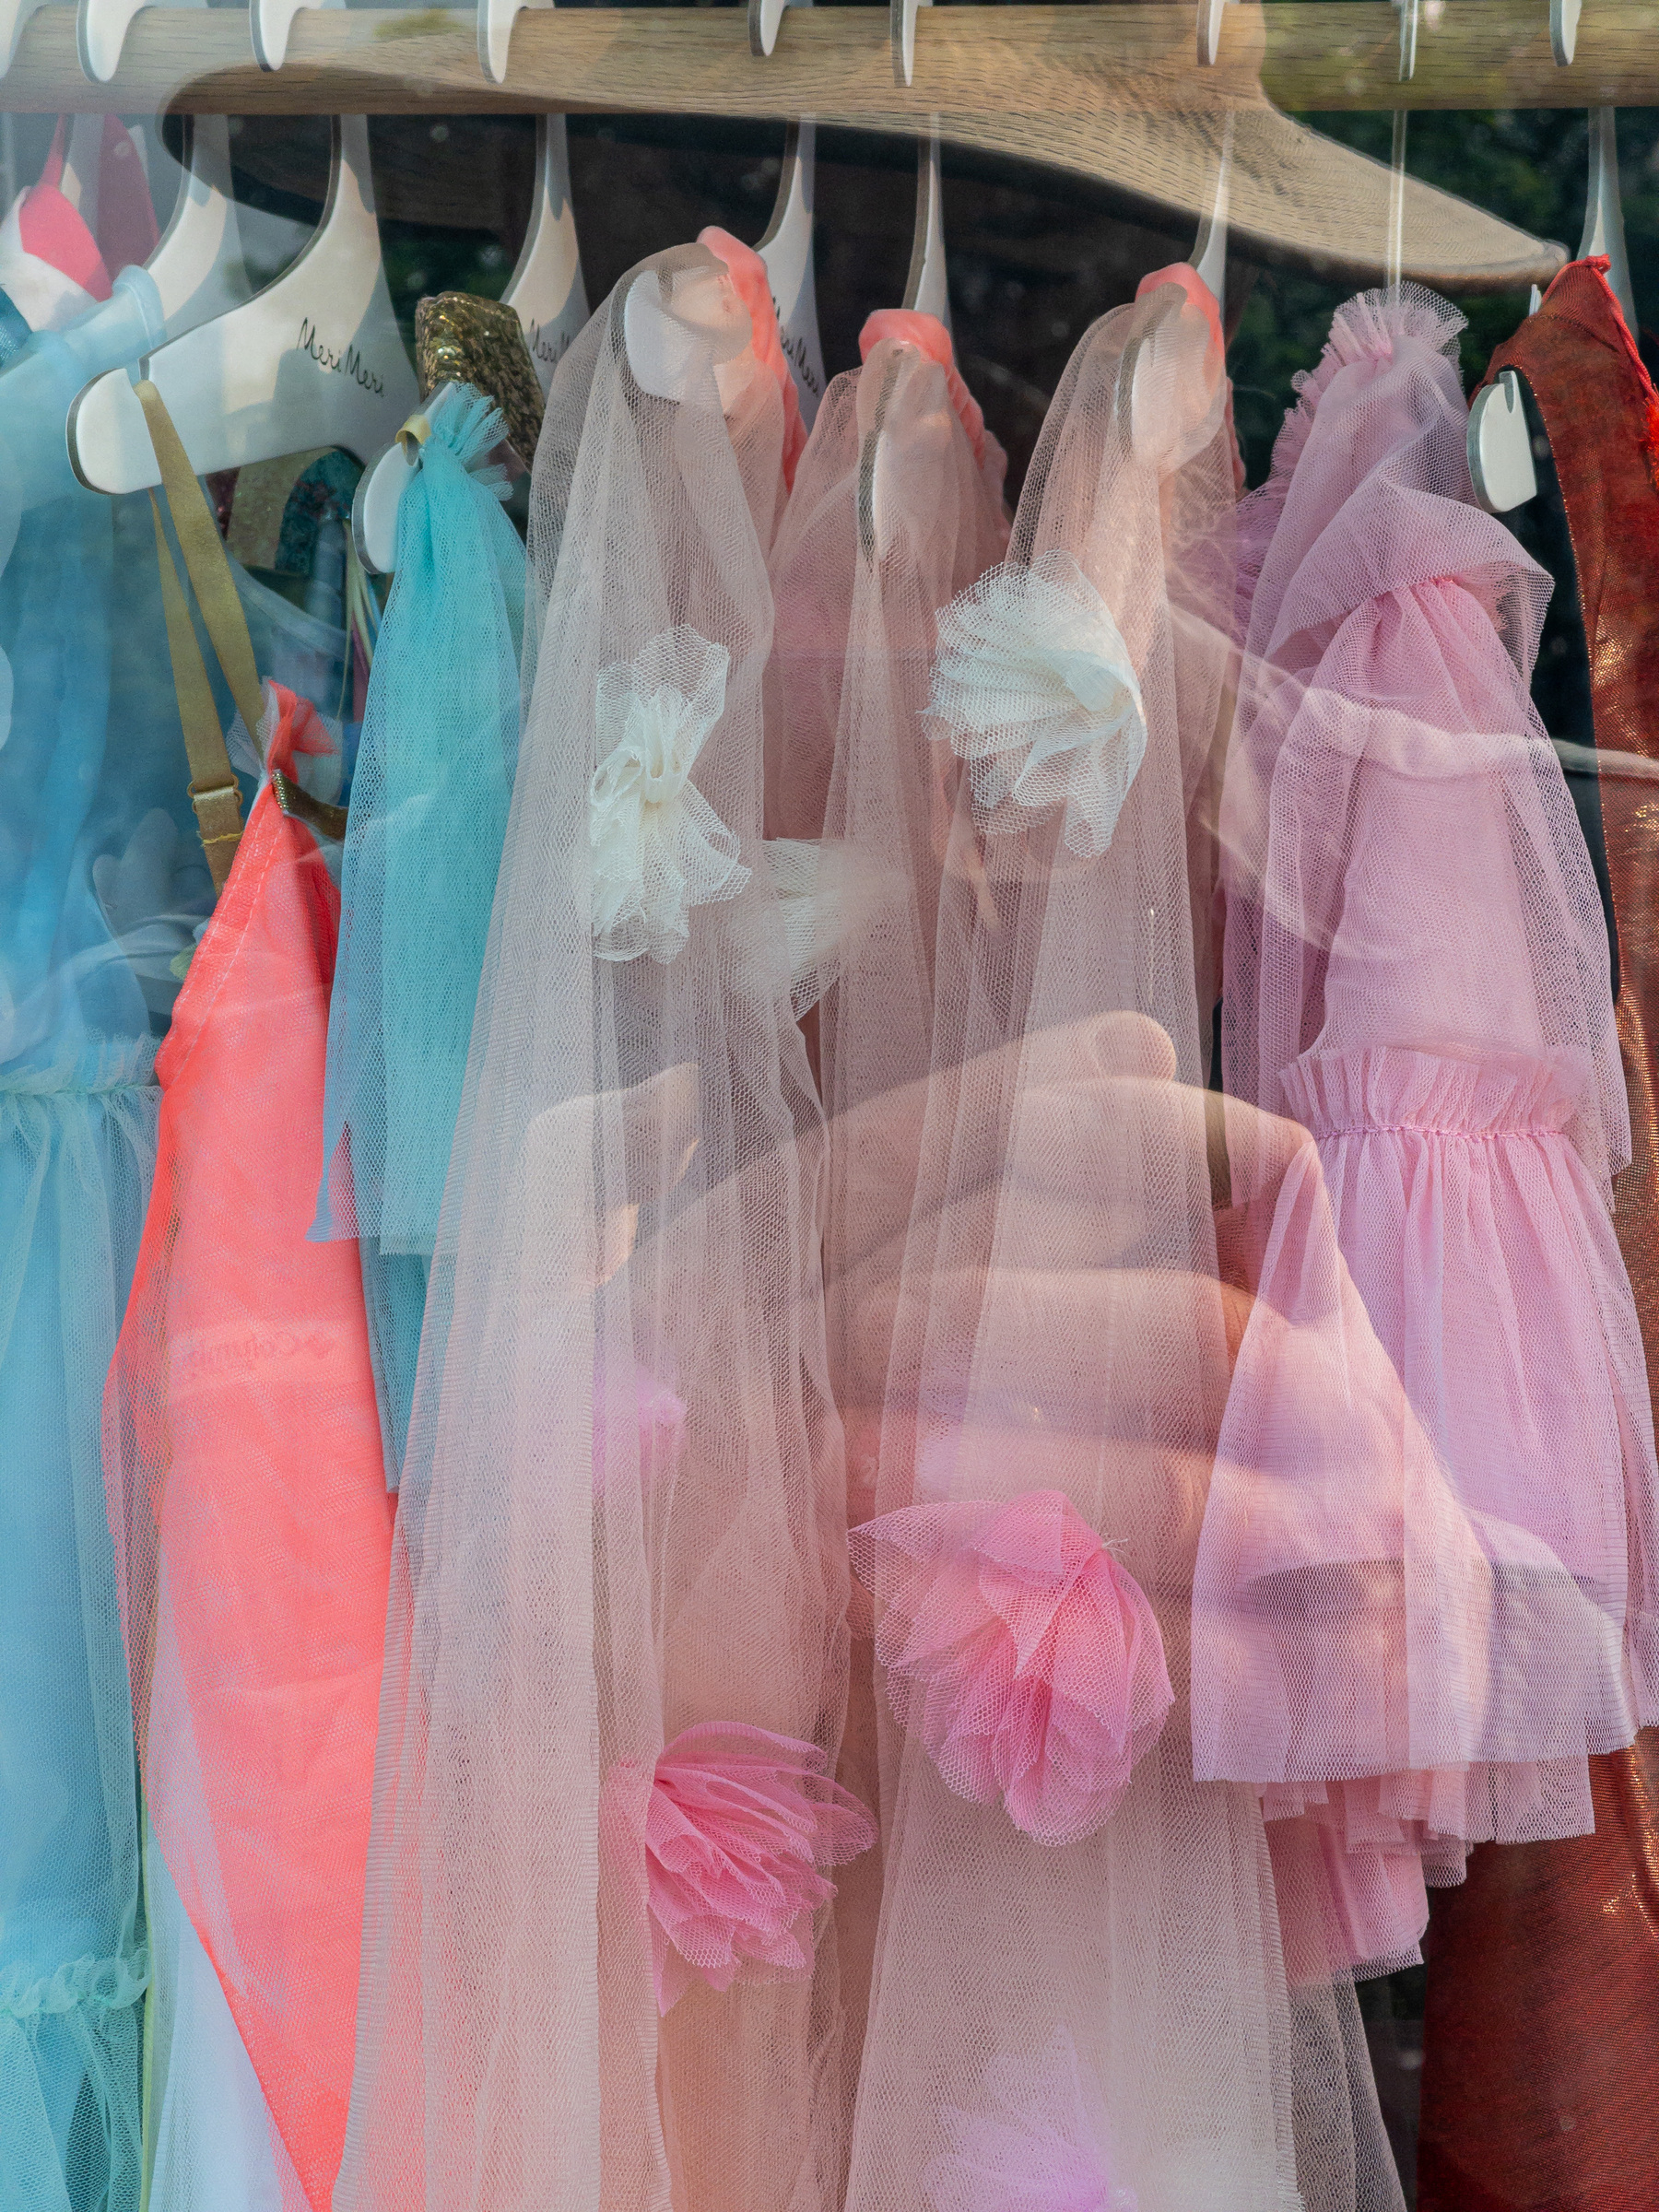 Pastel colored, gauzy children’s dresses hanging in a shop window with the reflection of the photographer in the window layered over the top.